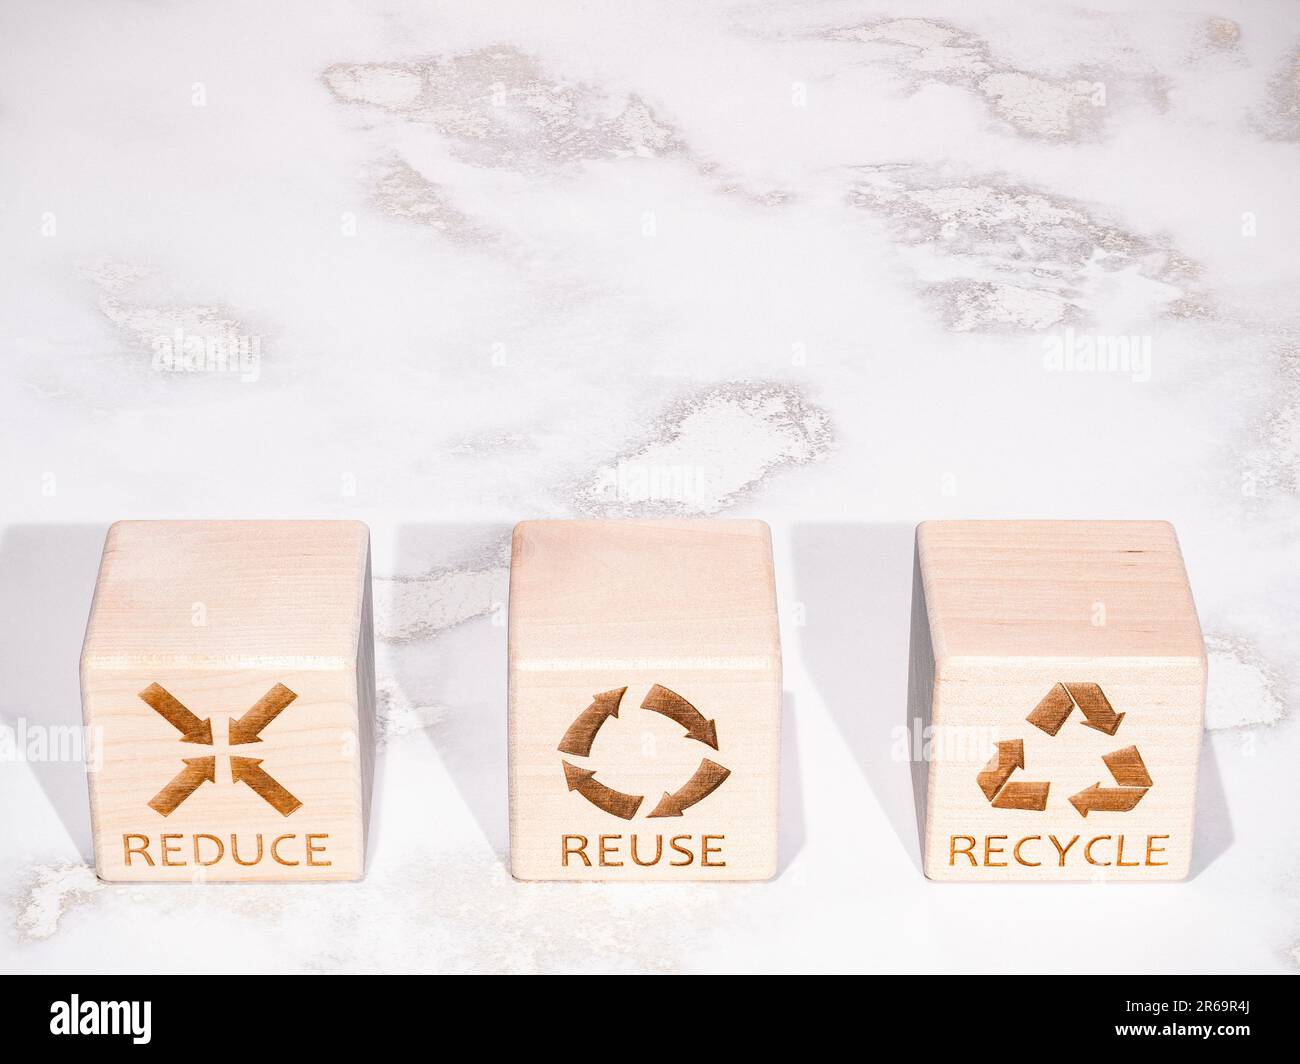 Reduce, Reuse, and Recycle sustainable resources concept symbols Stock Photo